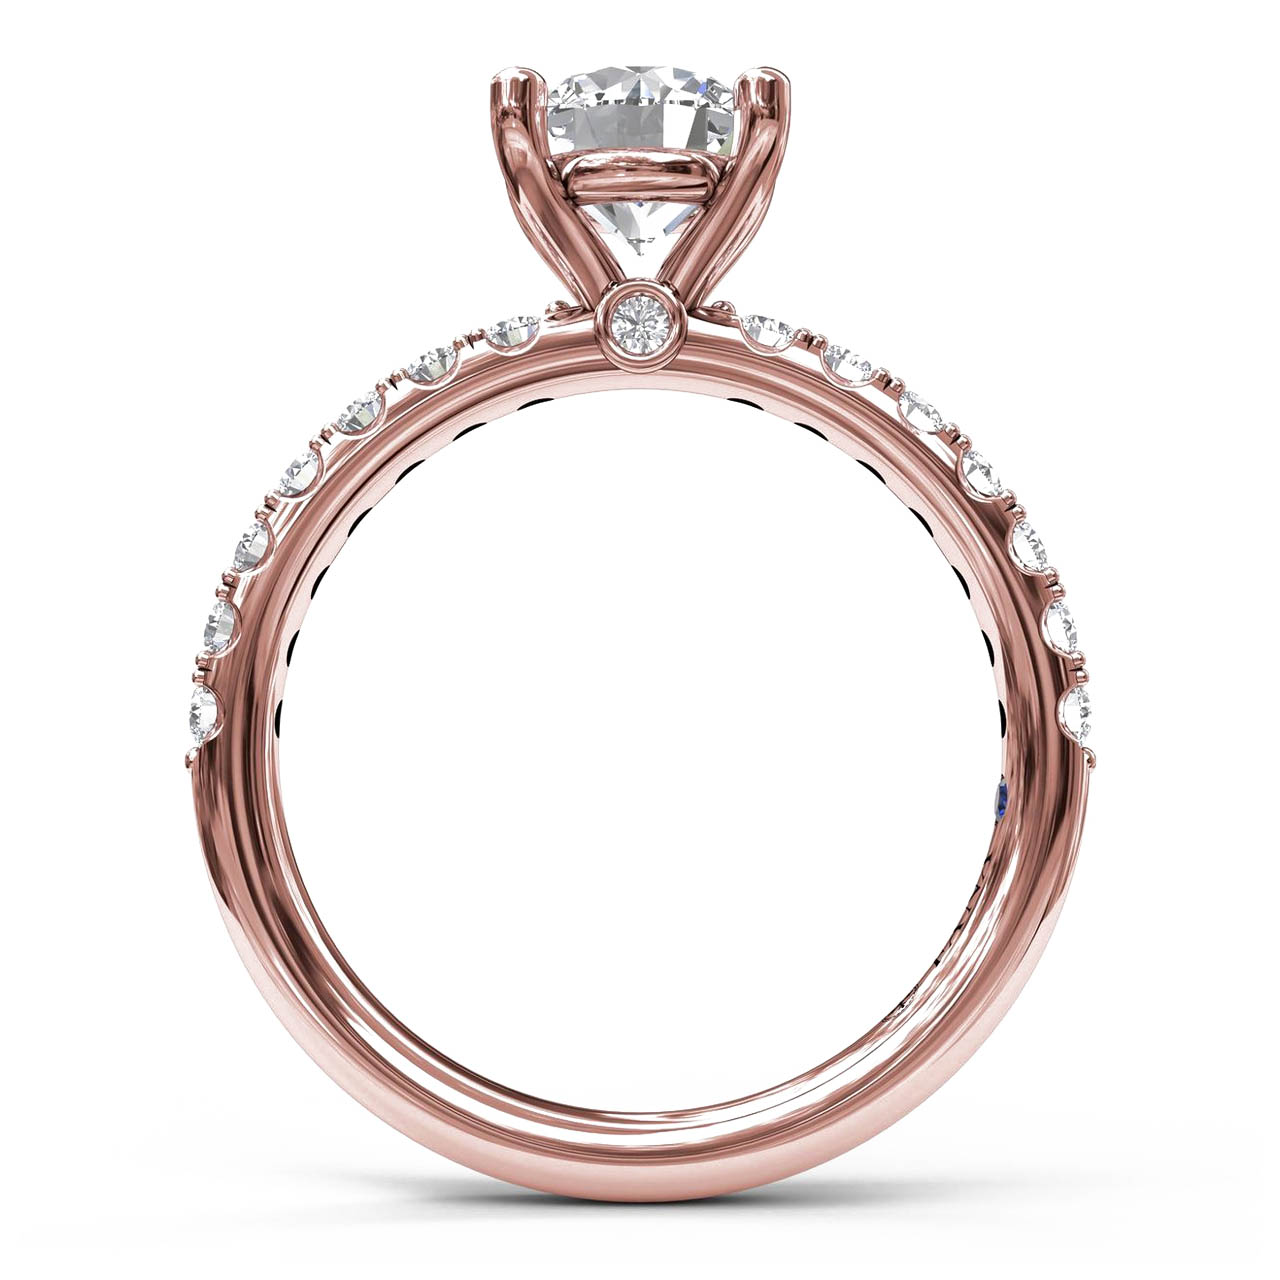 Fana Classic Pave Round Cut Engagement Ring Setting in 14kt Rose Gold (1/3ct tw)